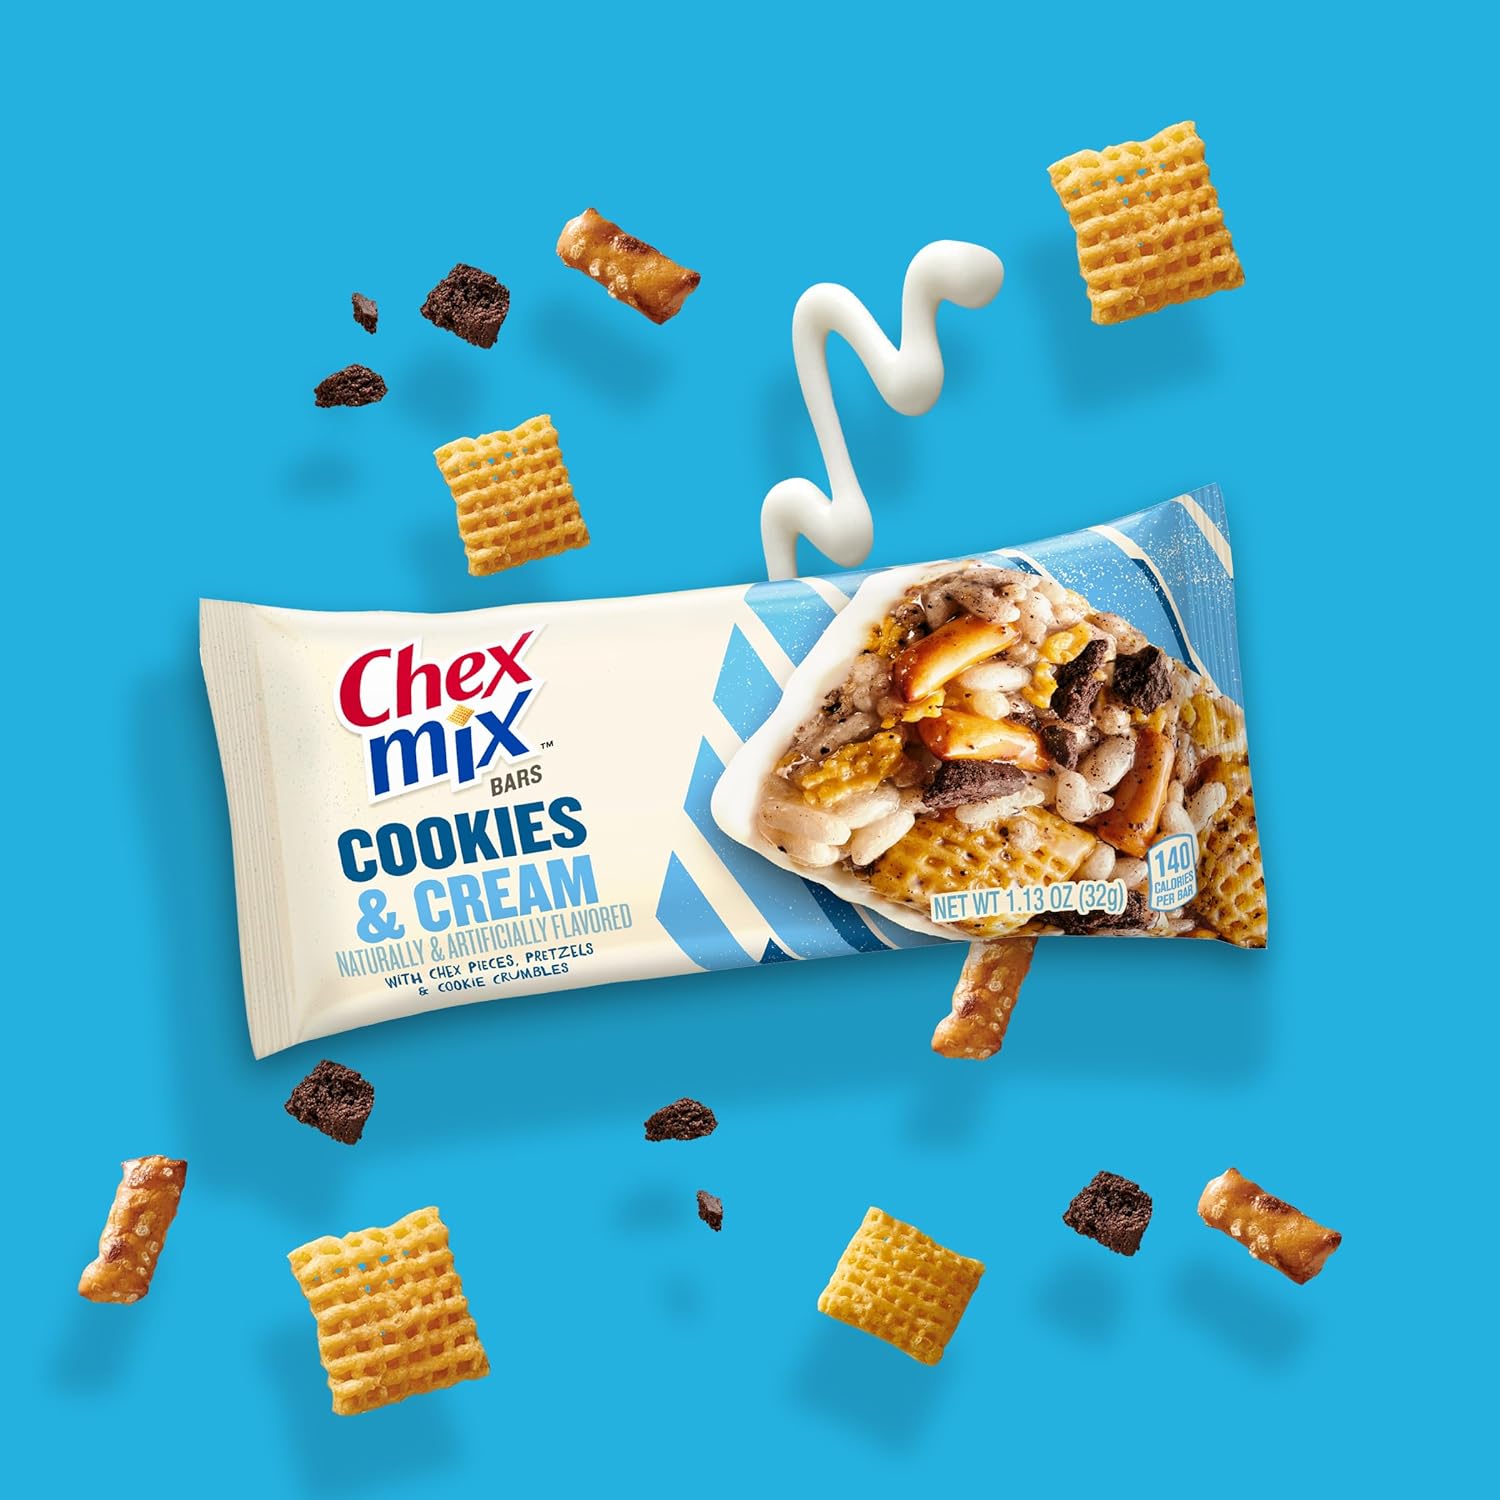 Chex Mix Cookies & Cream Treat Bar, 6 Bars : Grocery & Gourmet Food